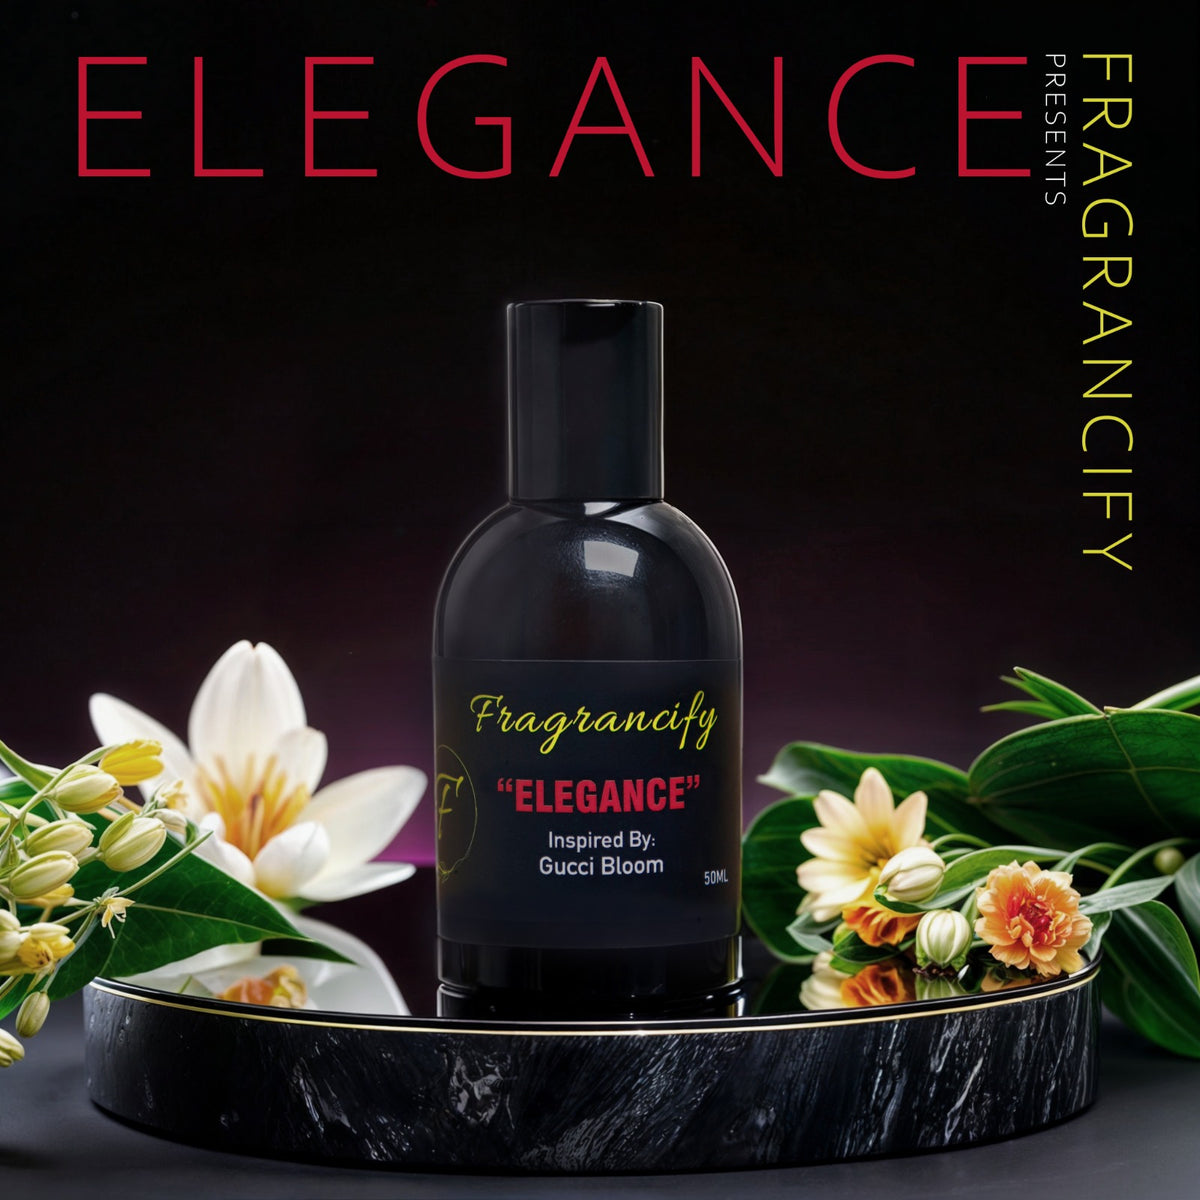 ELEGANCE-INSPIRED BY GUCCI BLOOM